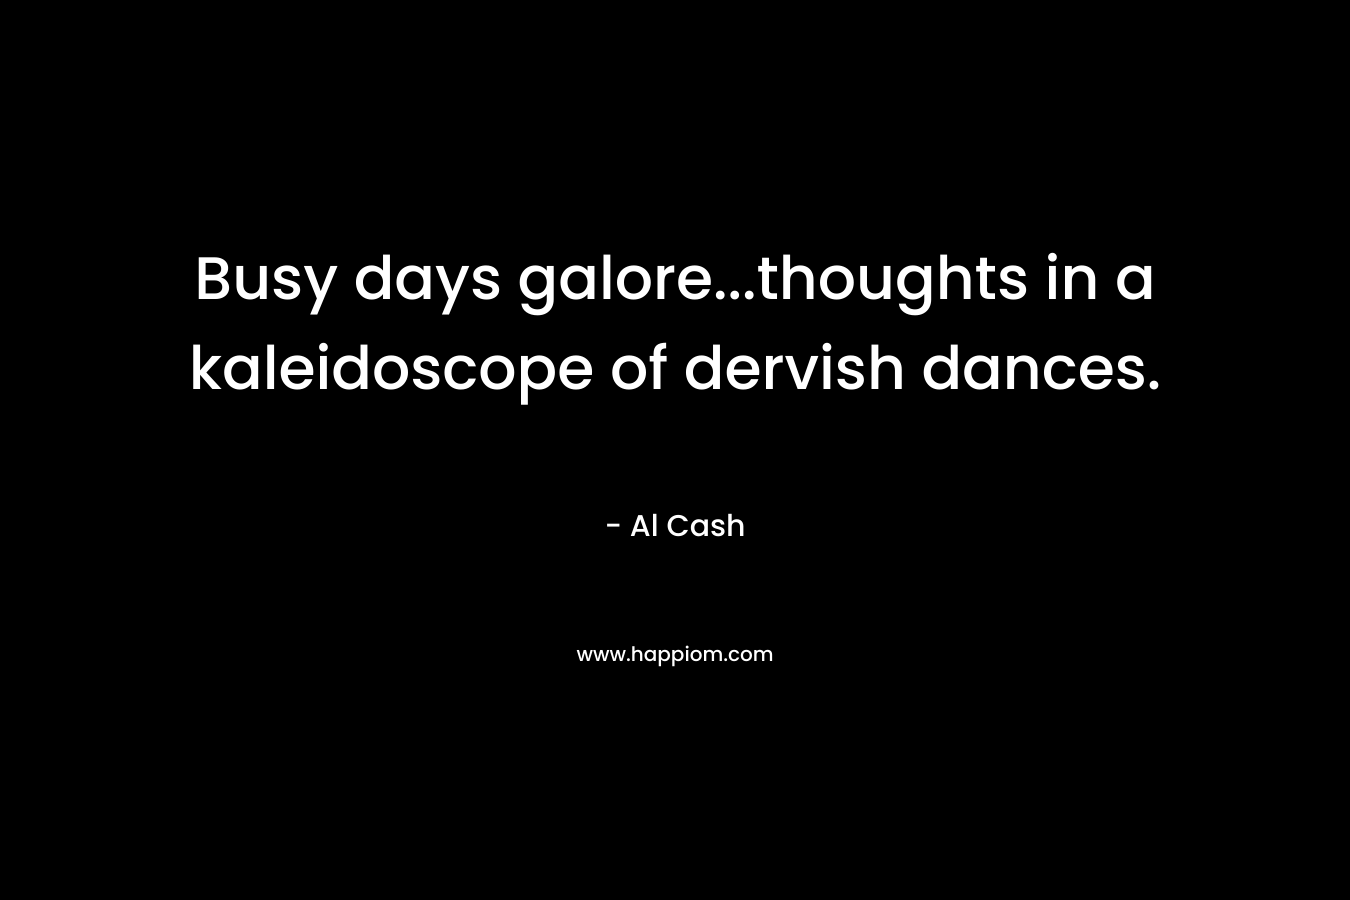 Busy days galore...thoughts in a kaleidoscope of dervish dances.